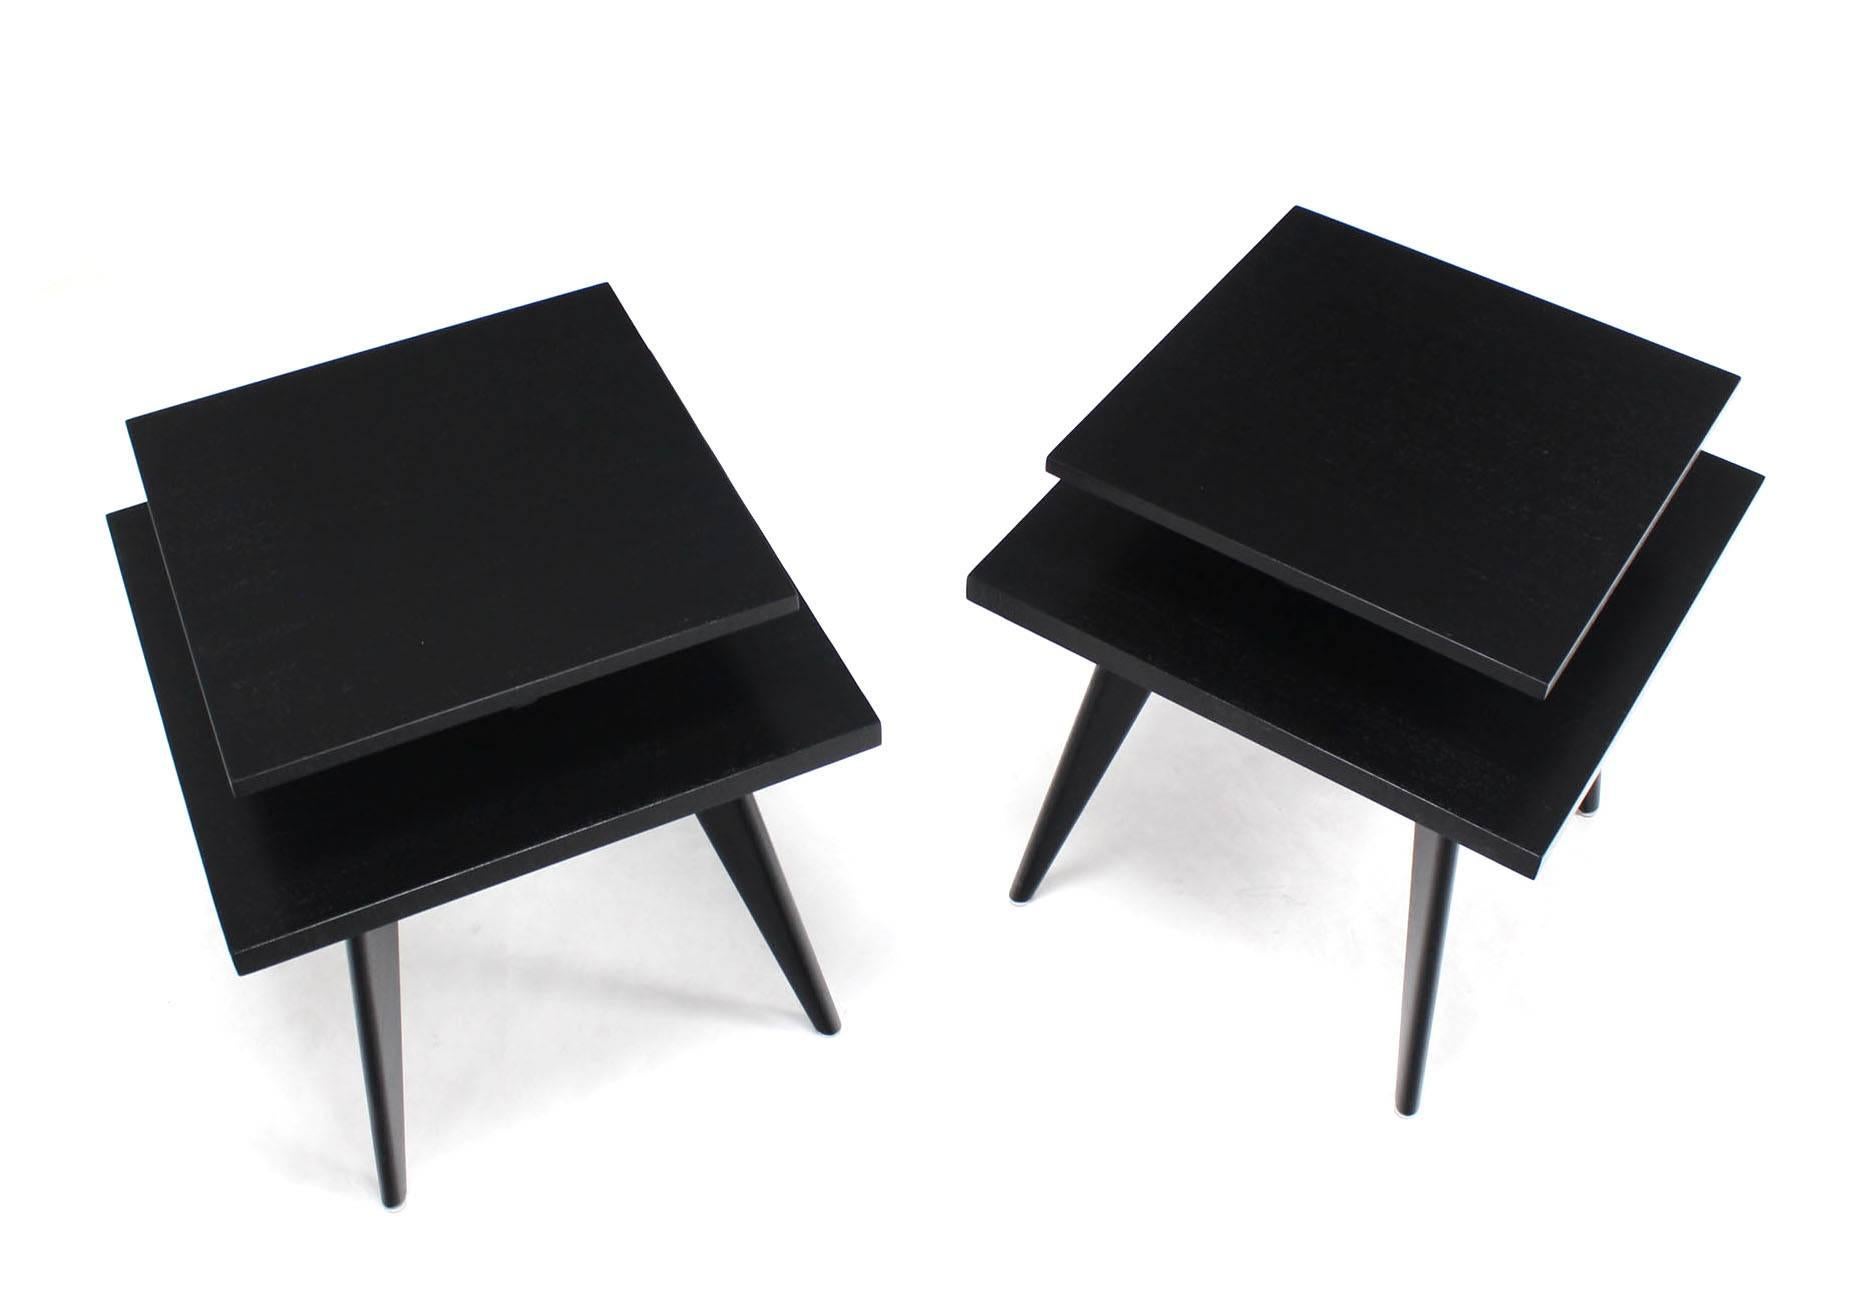 20th Century Pair of Black Lacquer Square Step Side Tables on Tapered Legs